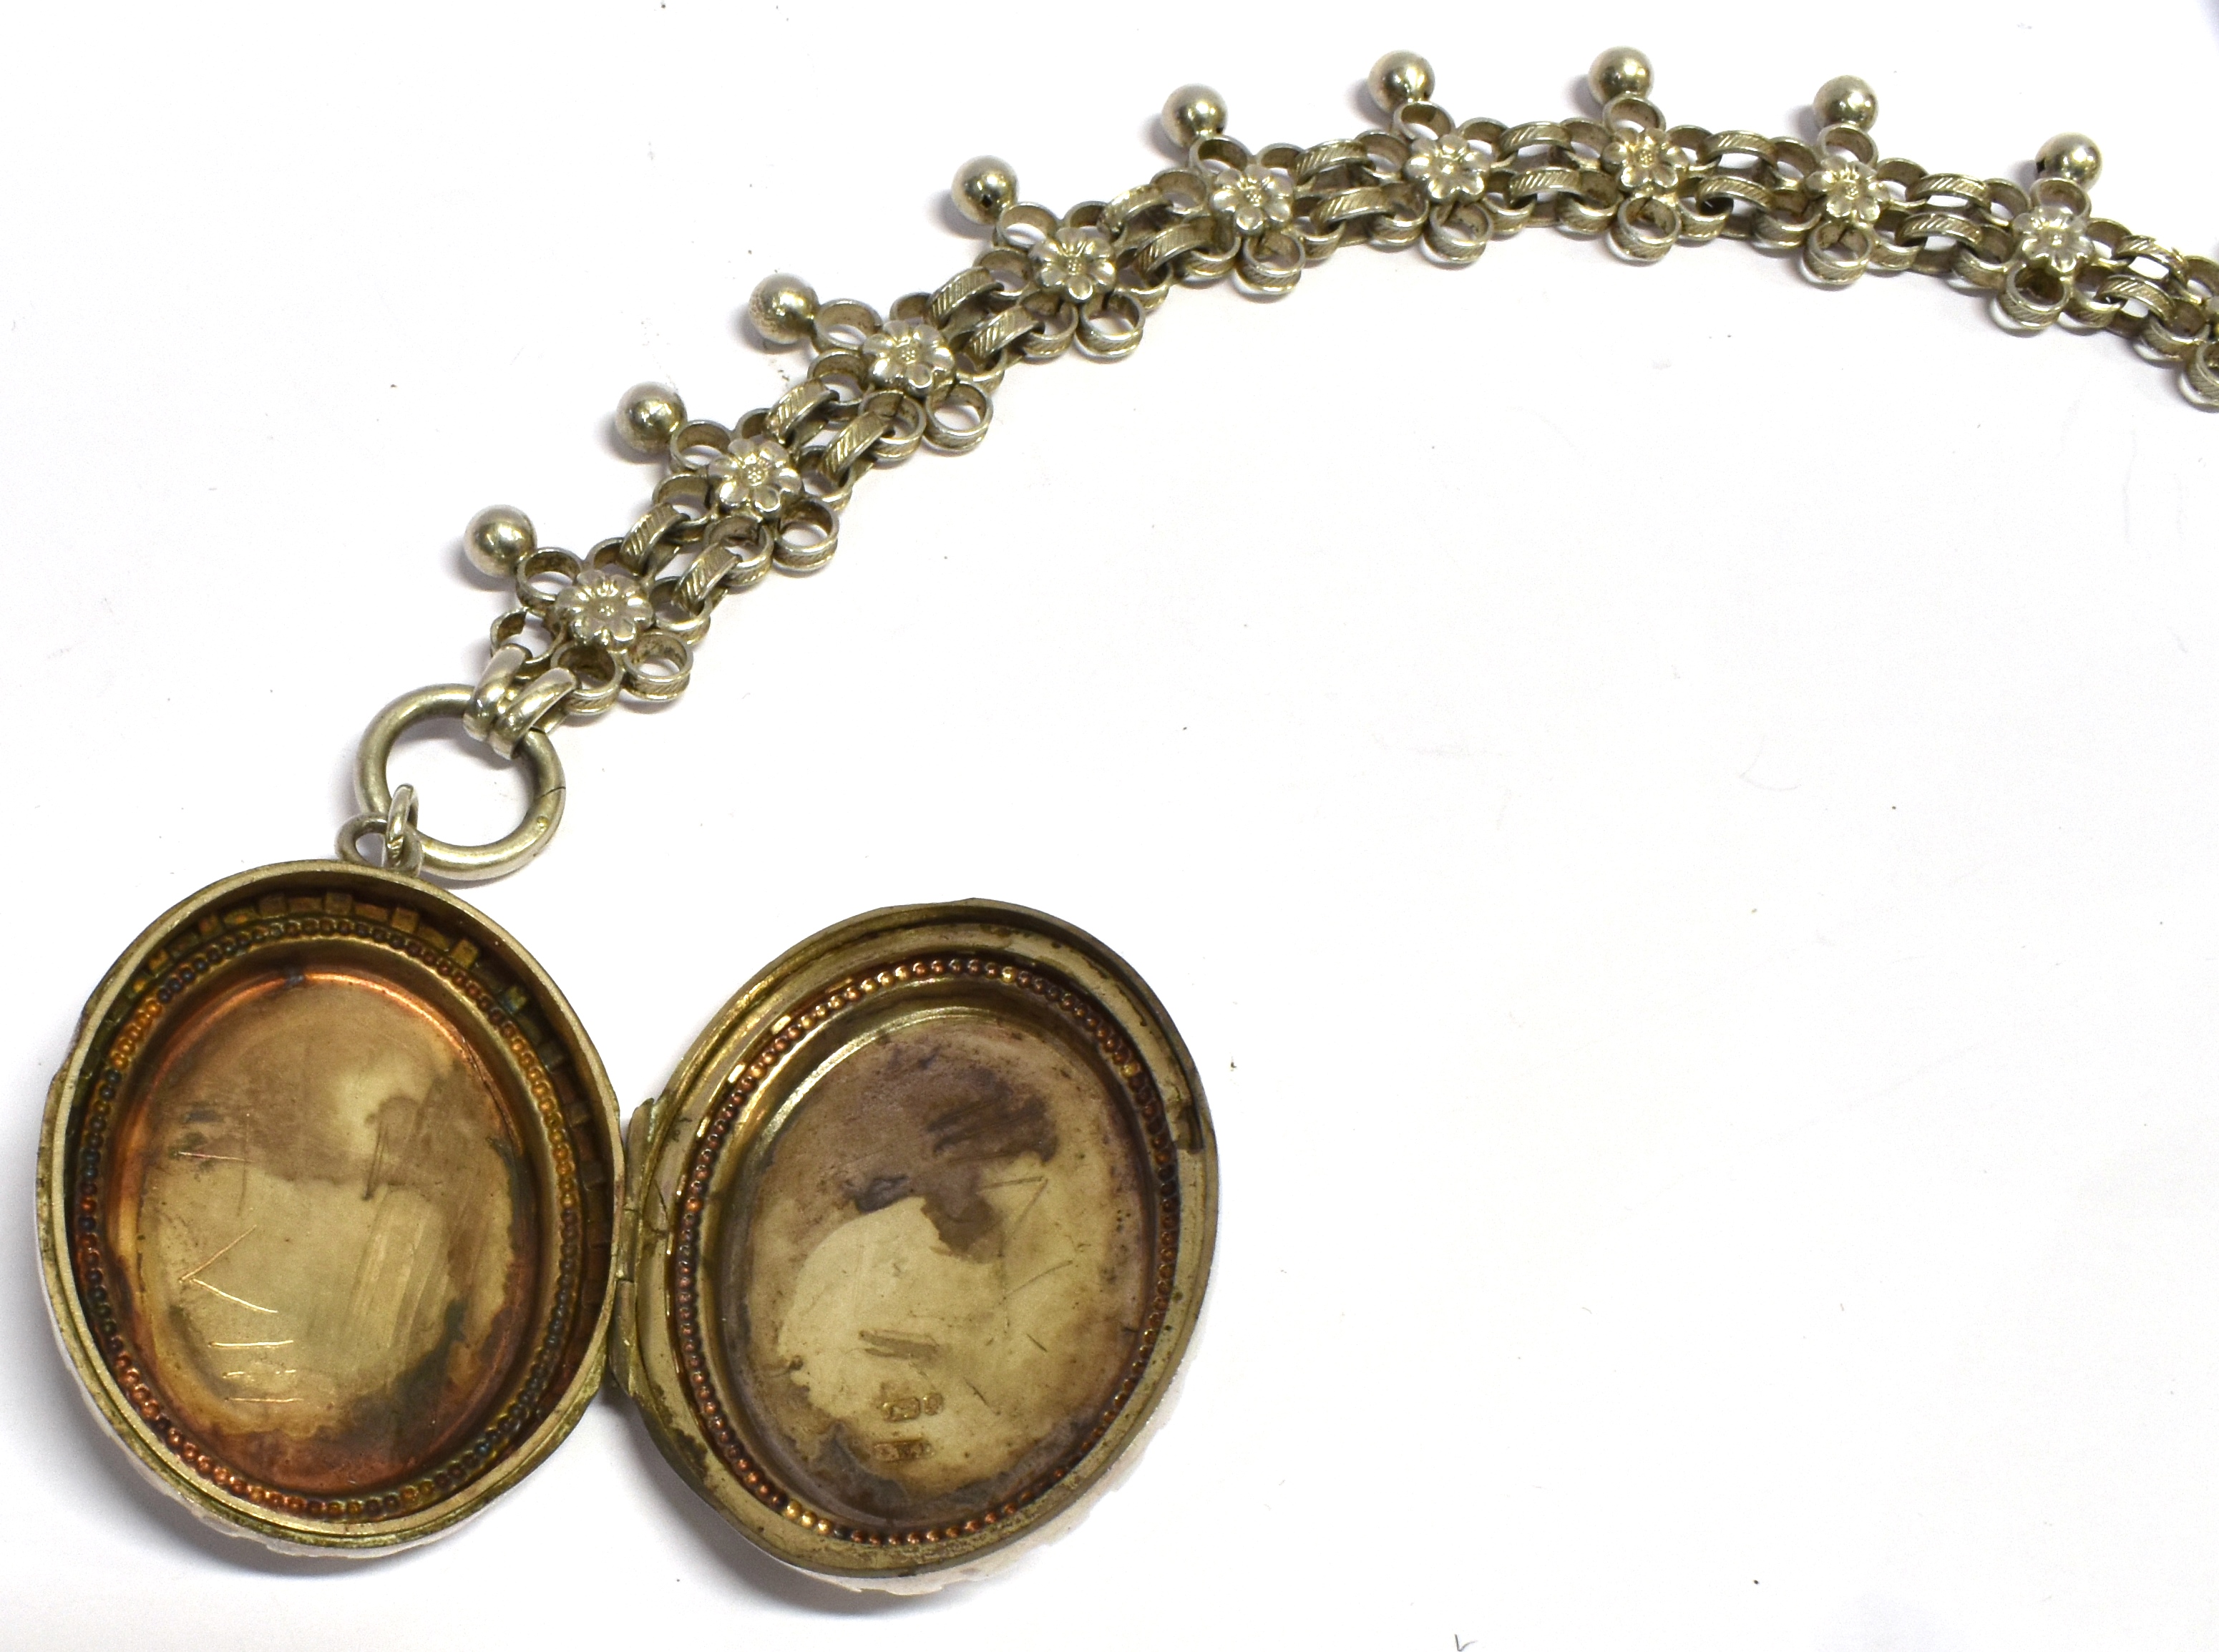 A VICTORIAN SILVER LOCKET with inlaid yellow and rose gold floral decoration to front, 45mm long - Image 3 of 3